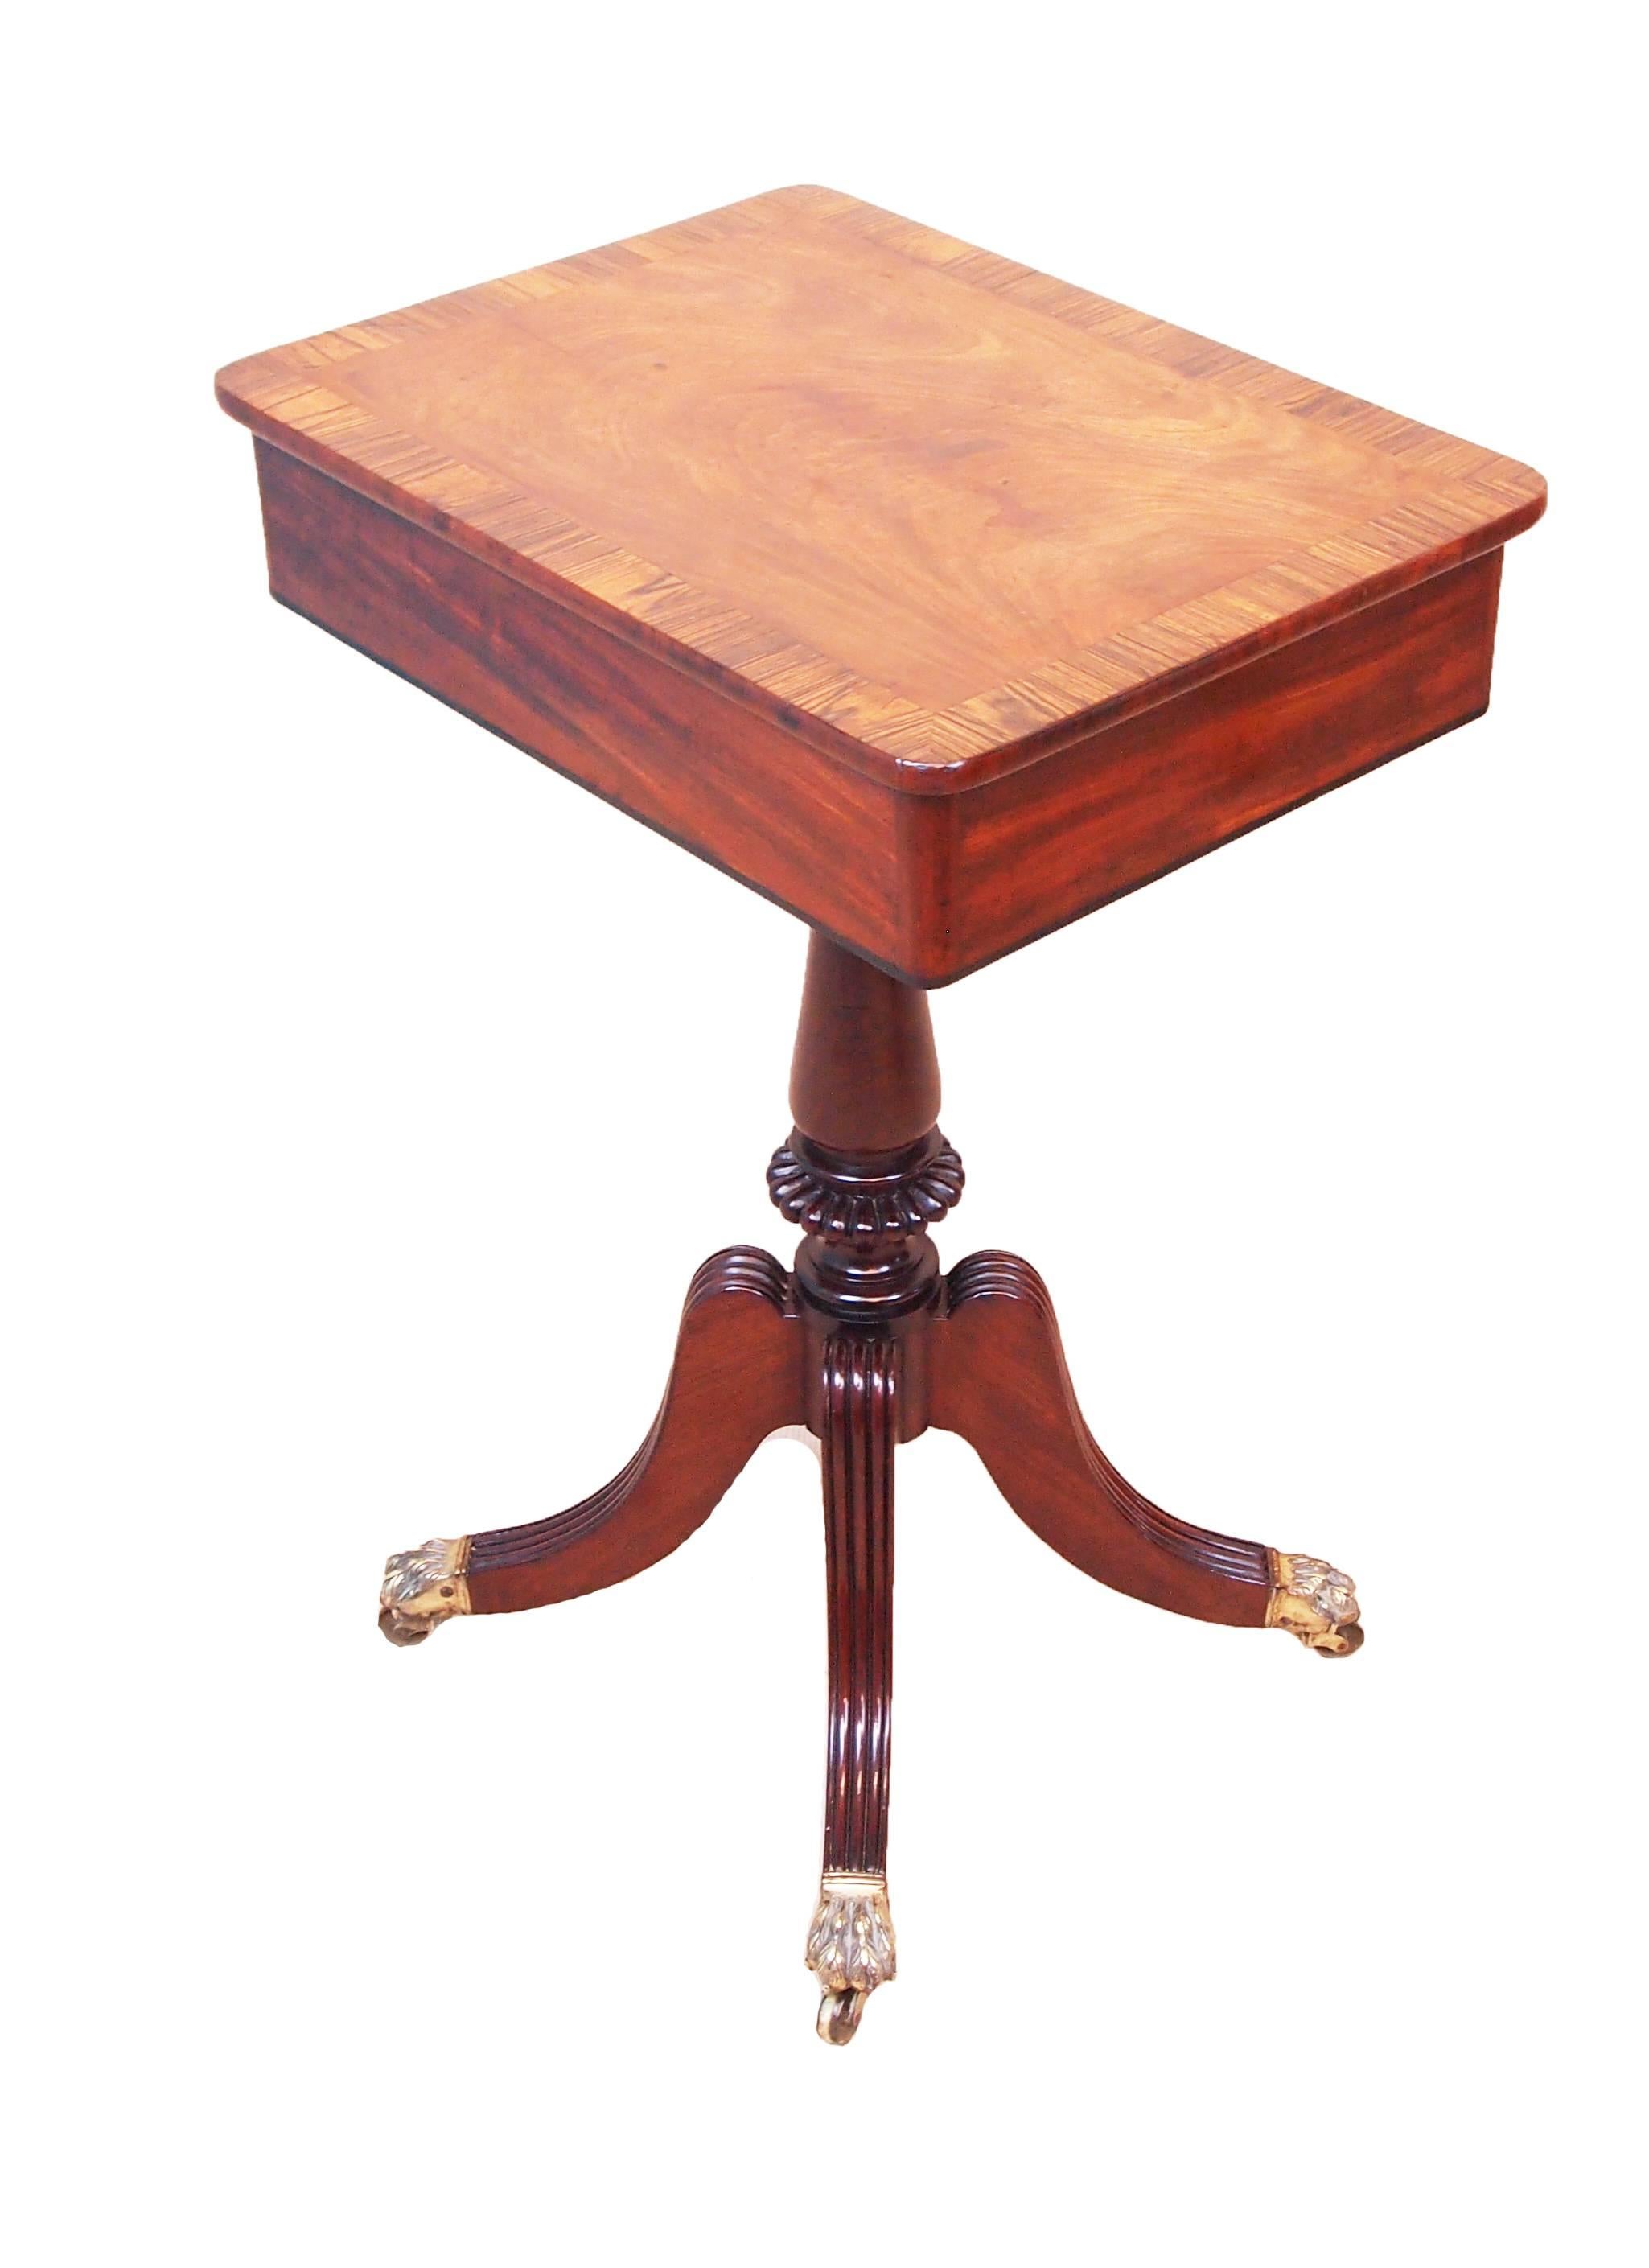 A very good quality Regency period mahogany lamp table having
superbly figured and crossbanded oblong top with one drawer to
frieze raised on elegant turned central column and four splayed
legs with original brass castors.